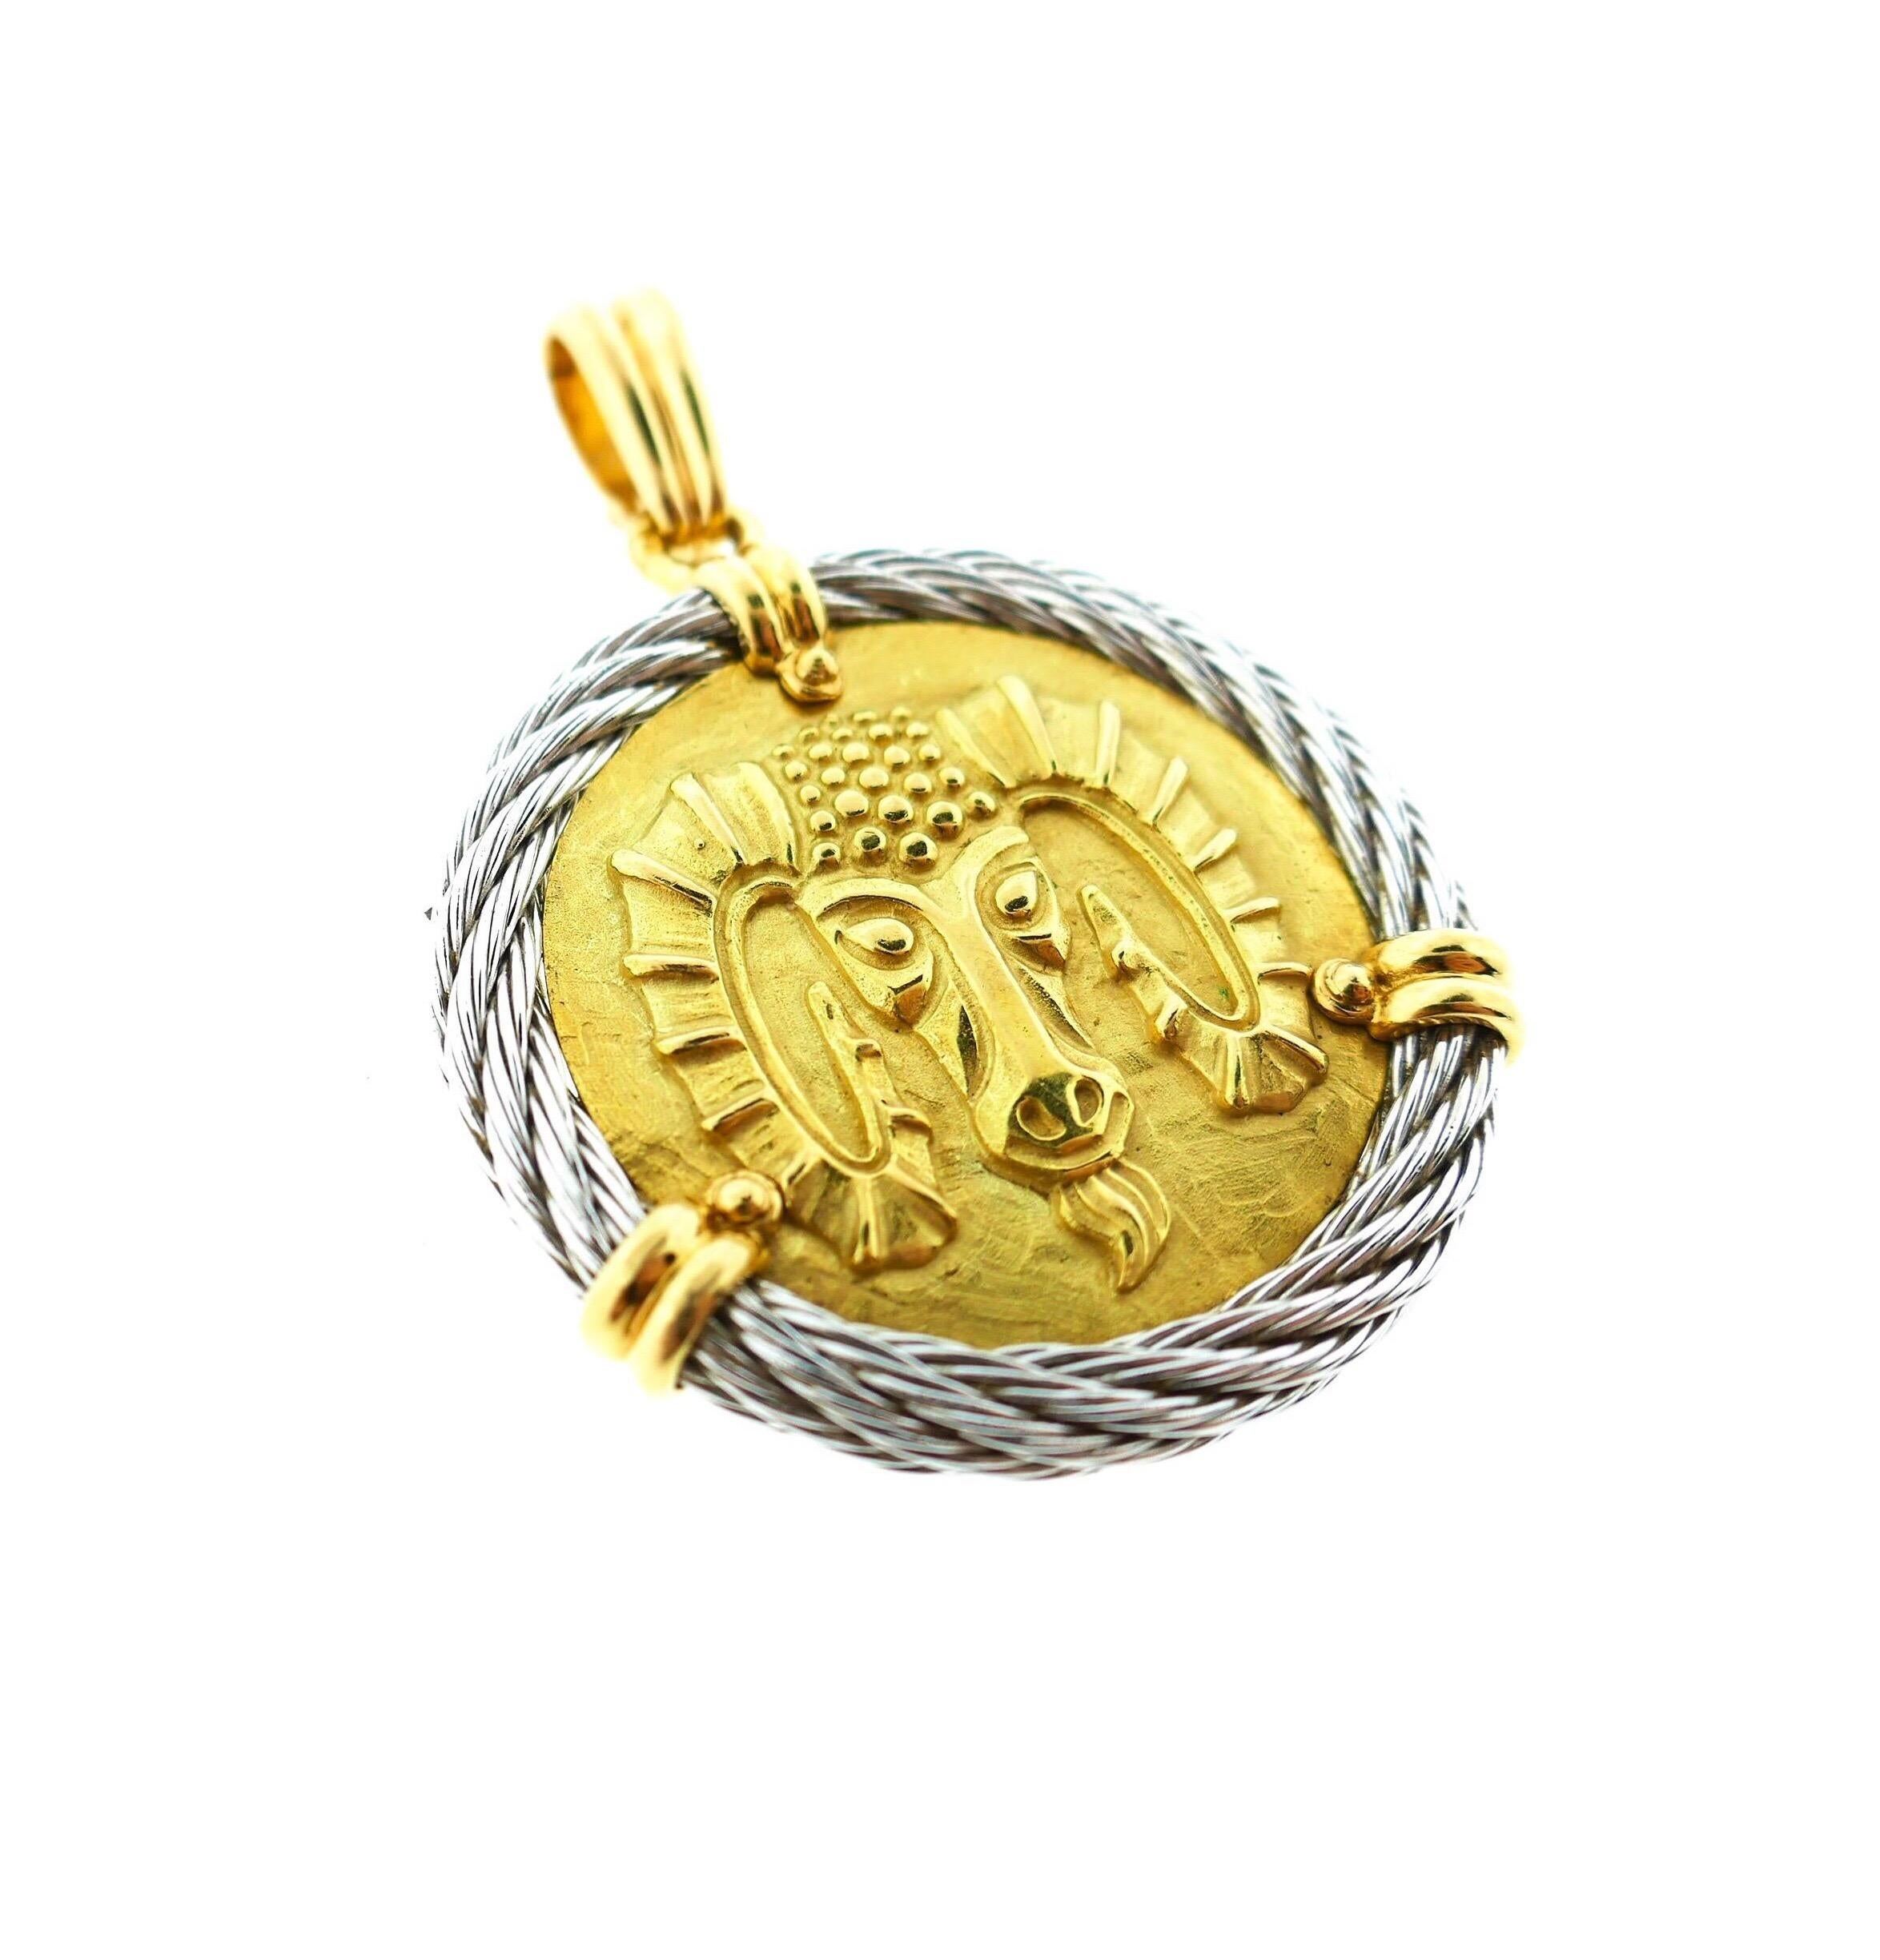 Fred Paris 18 Karat Yellow and White Gold Zodiac Aries Pendant 

This is a beautiful Fred Paris Zodiac Aries pendant. It is crafted from 18 karat yellow and 18 karat white gold and features a finely carved ram in the center. It displays an amazing